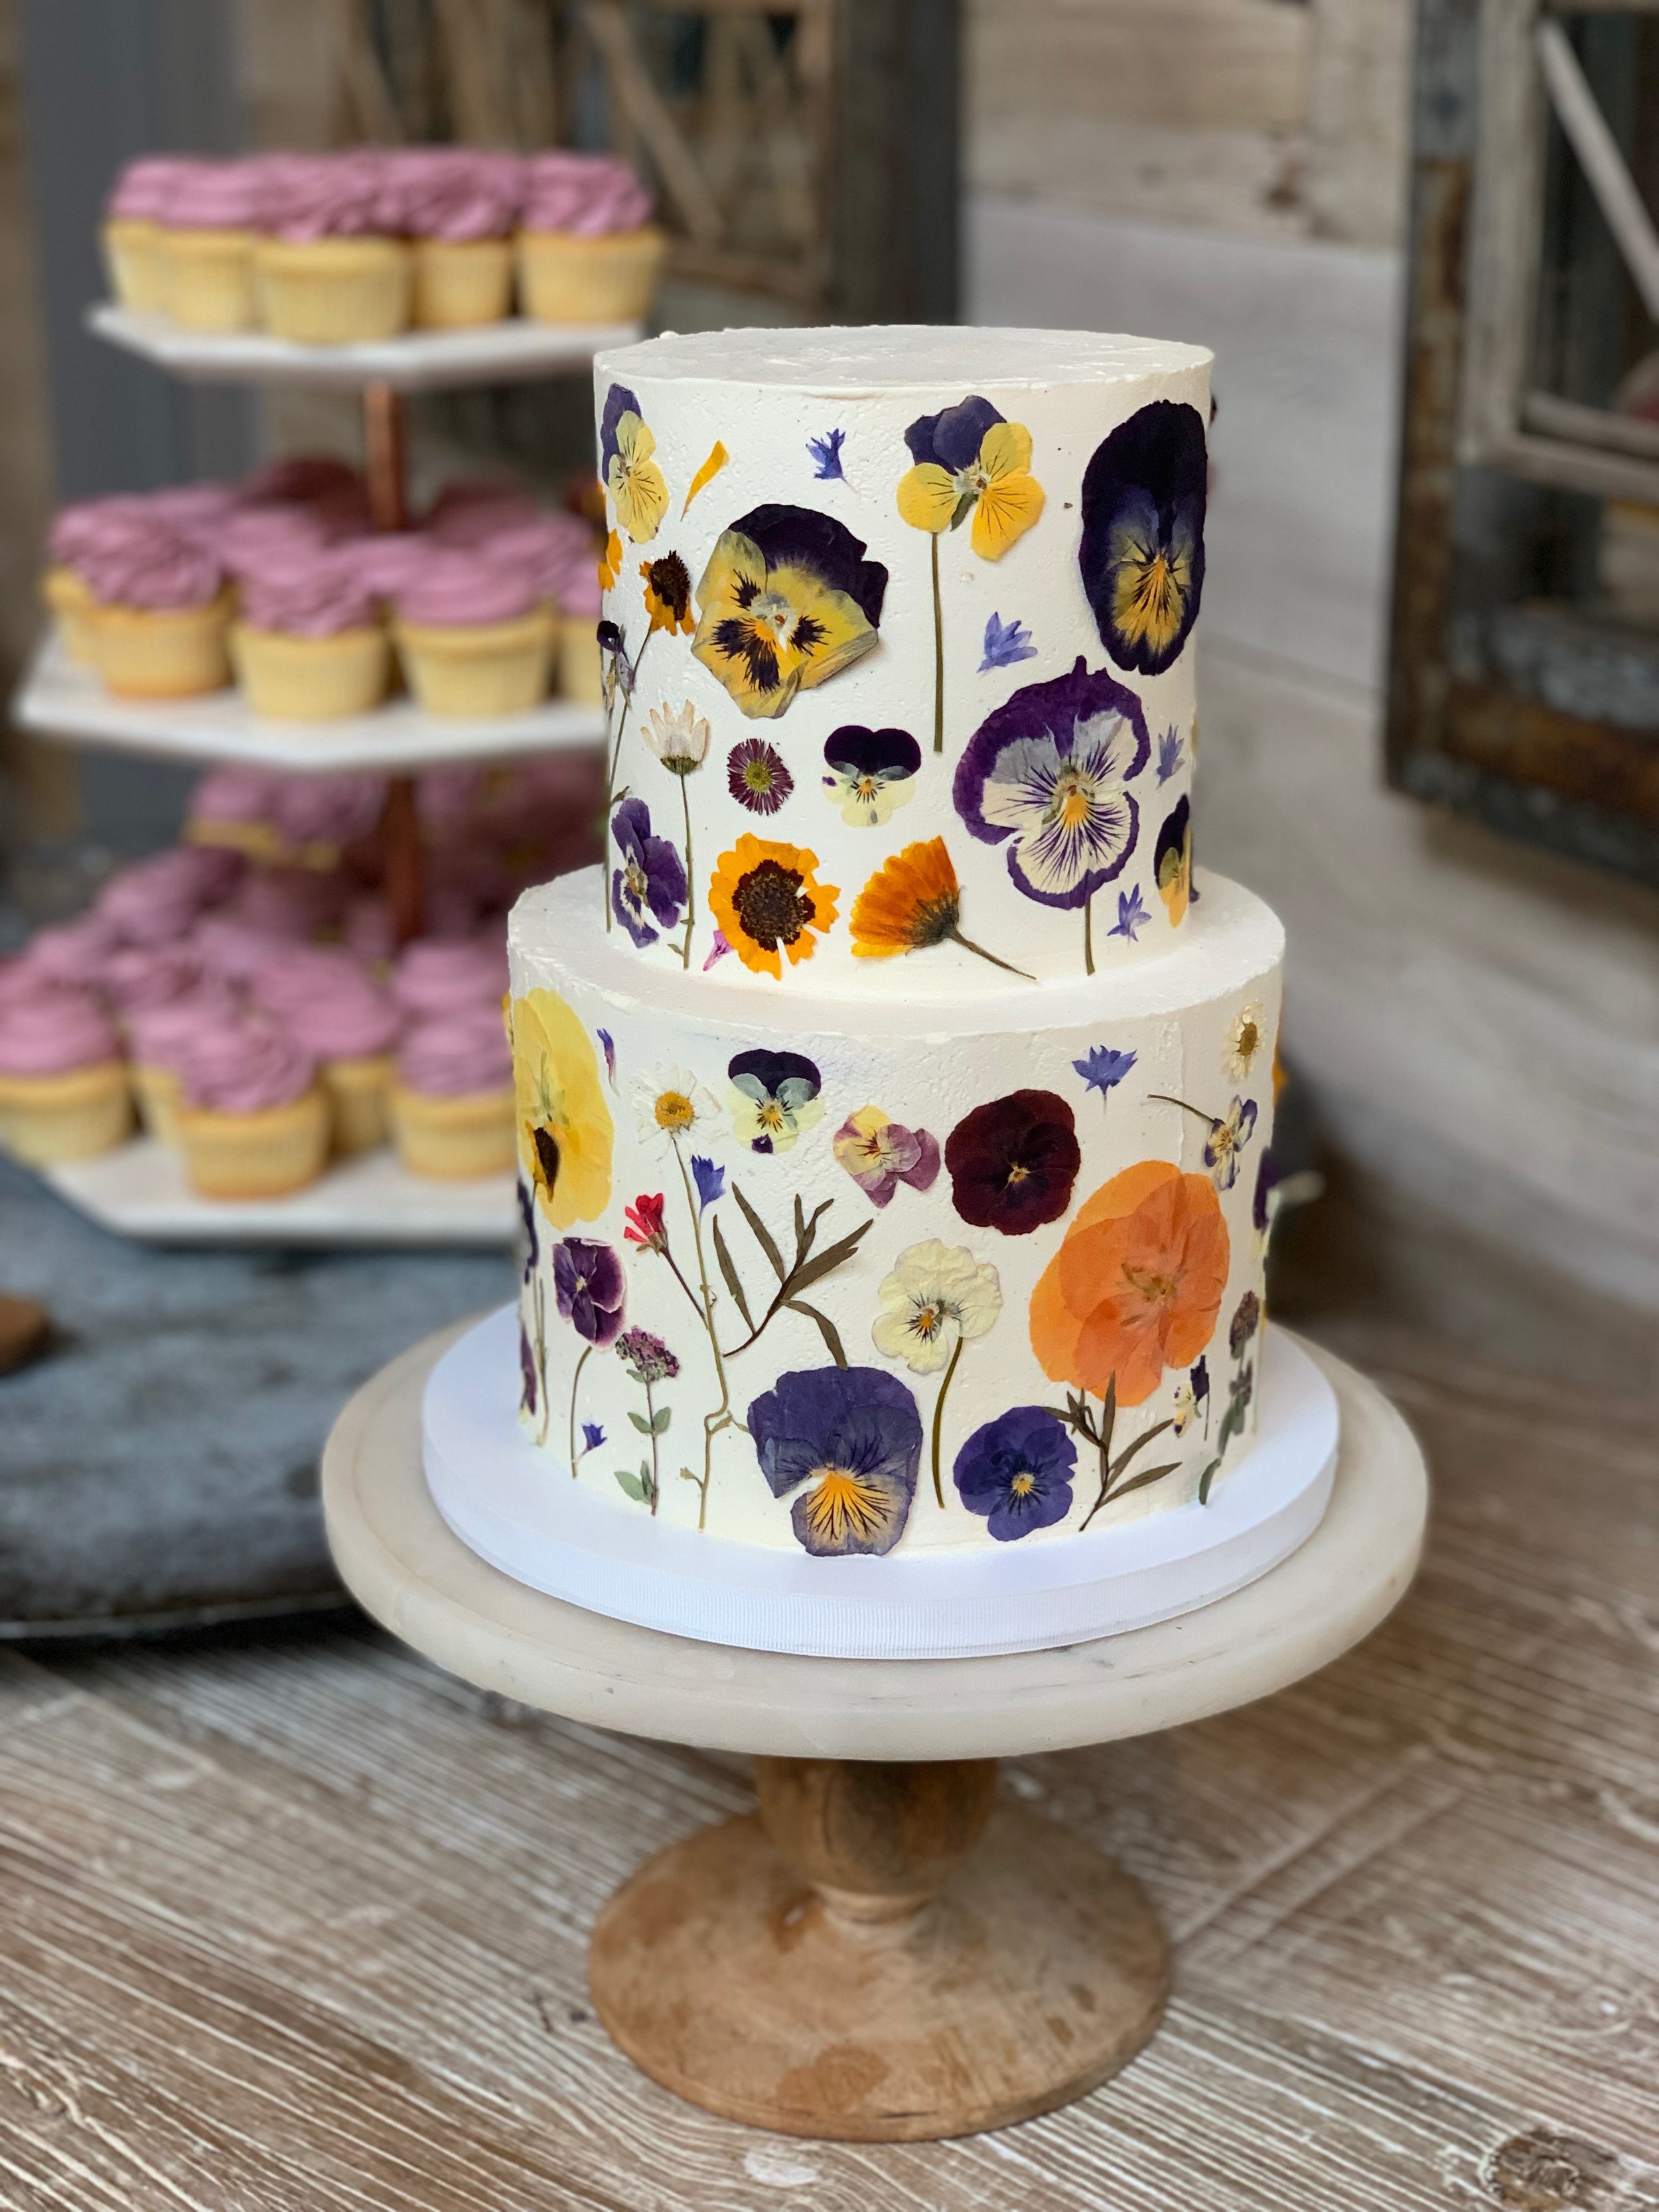 Edible Flowers For Cakes Purchase Store